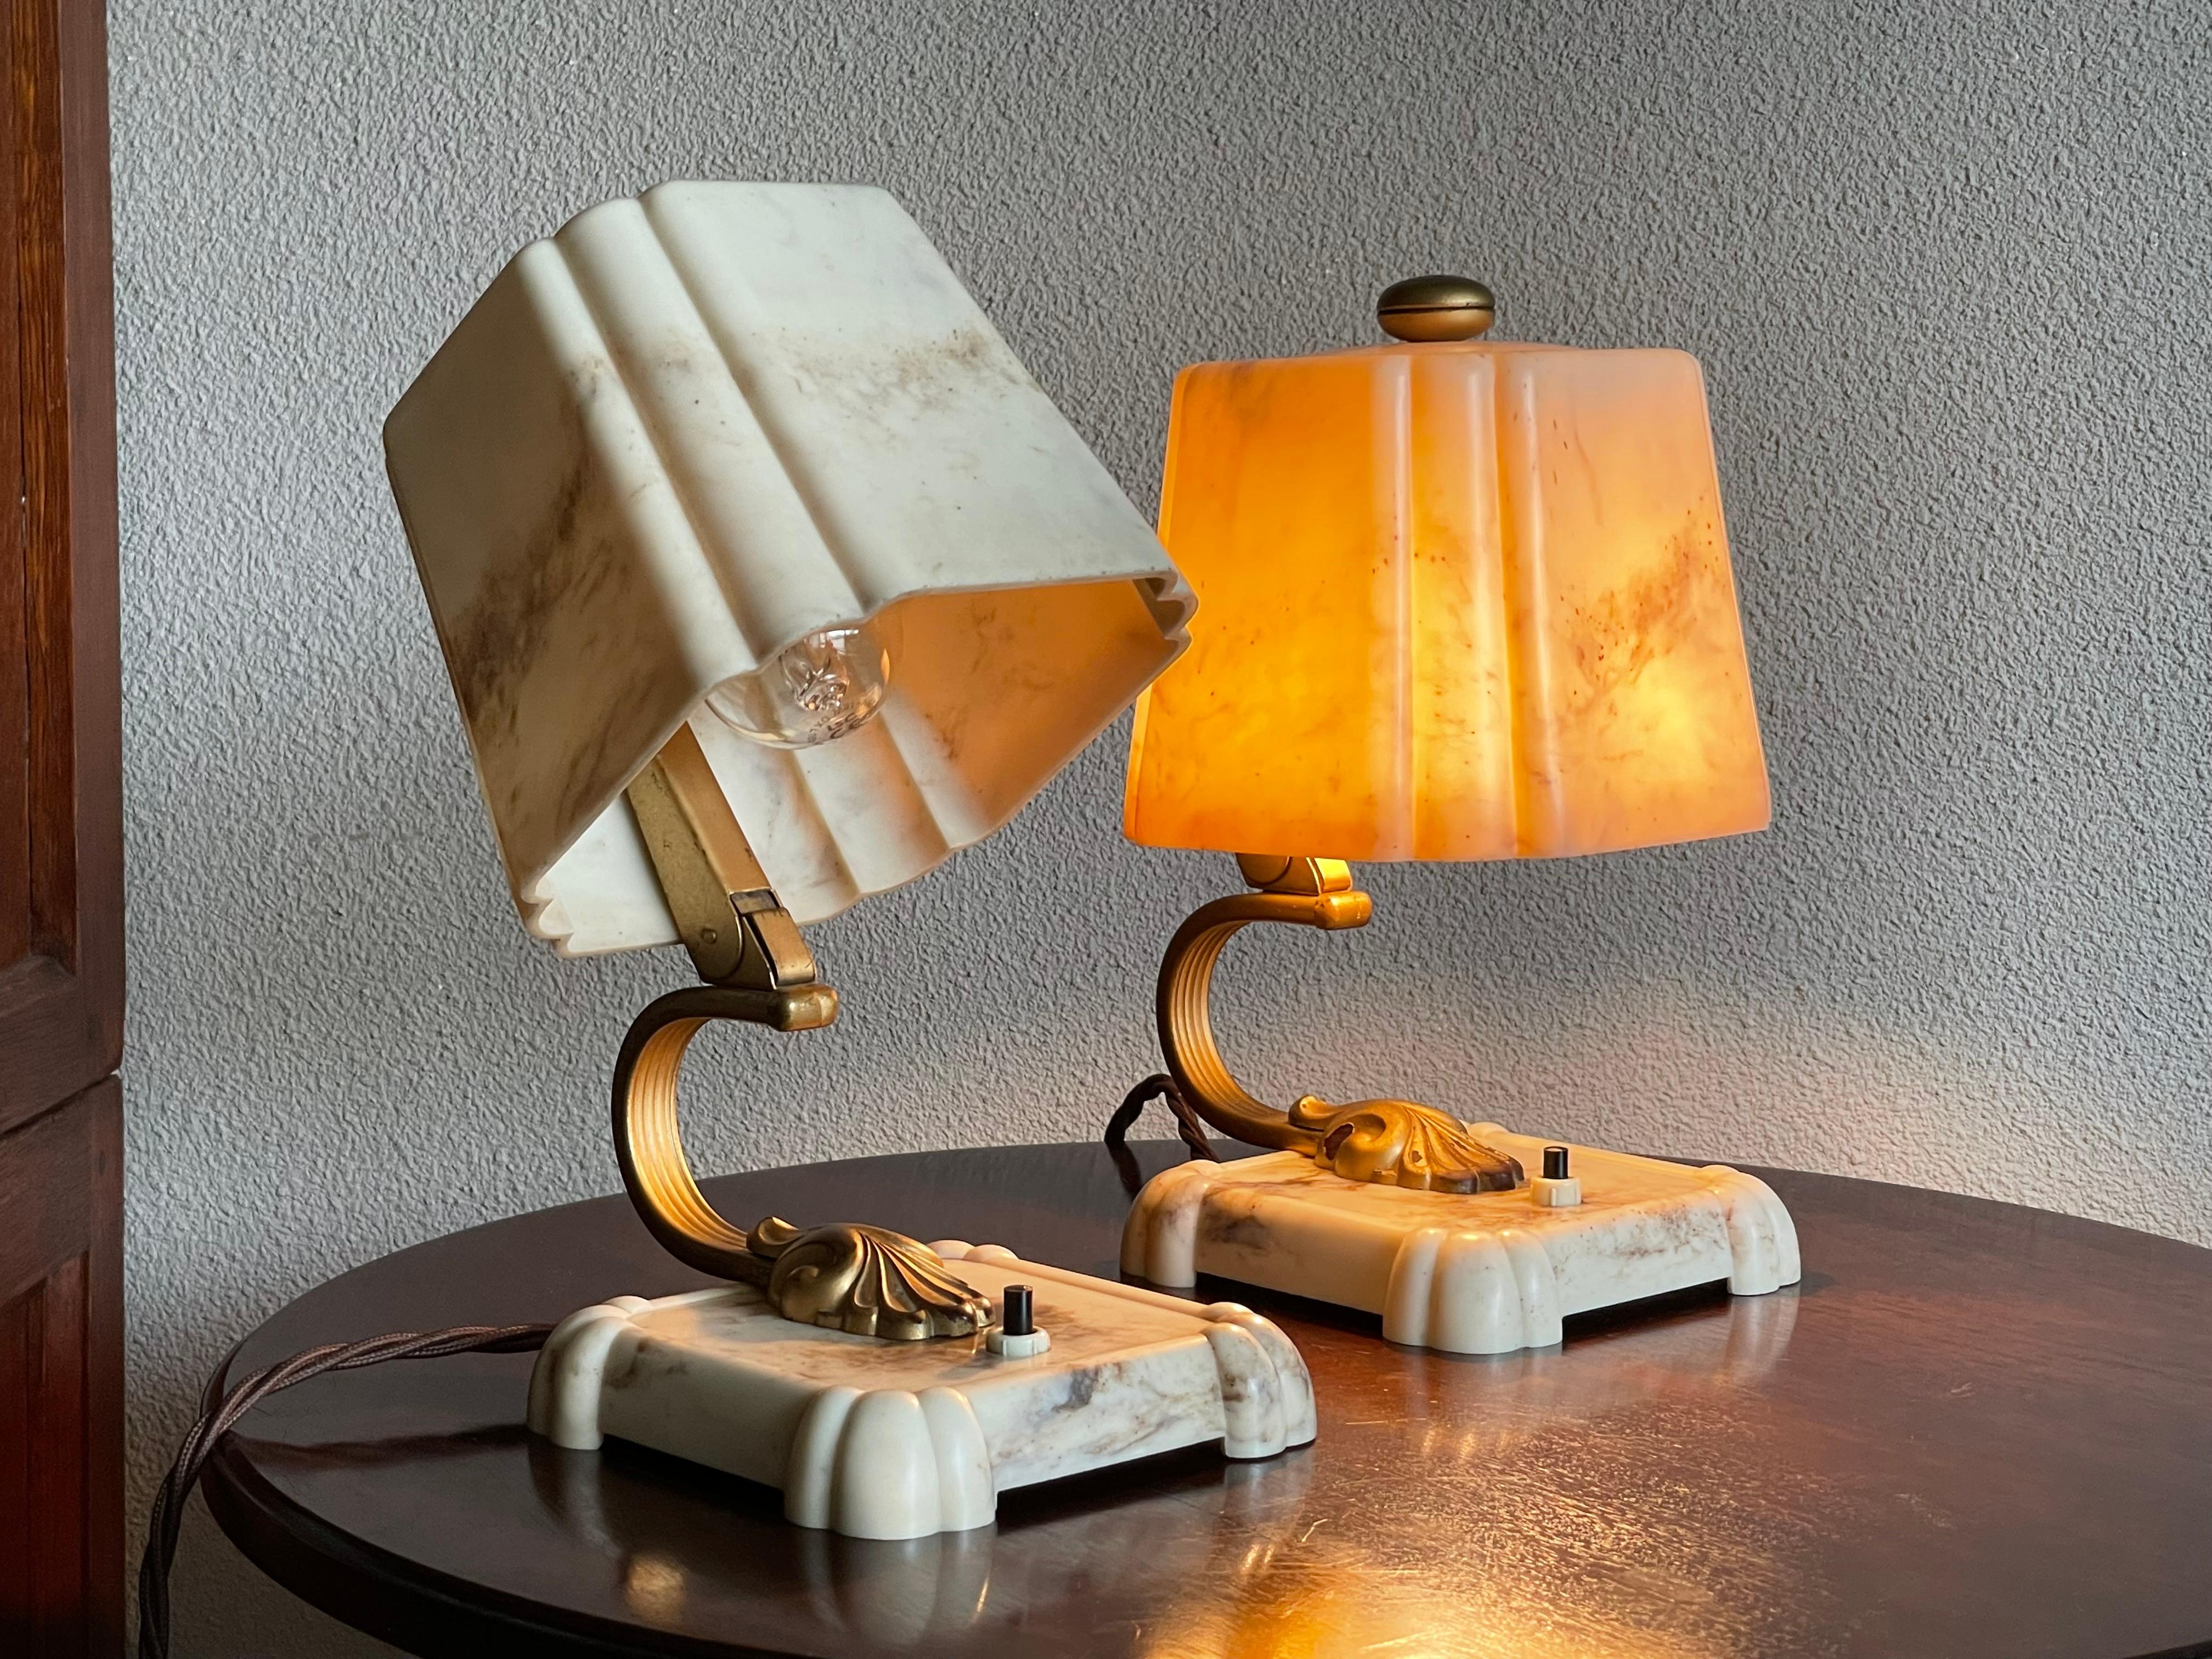 Stunning and Rare Pair of 1930s Art Deco Table or Bedside Lamps Made of Bakelite 2